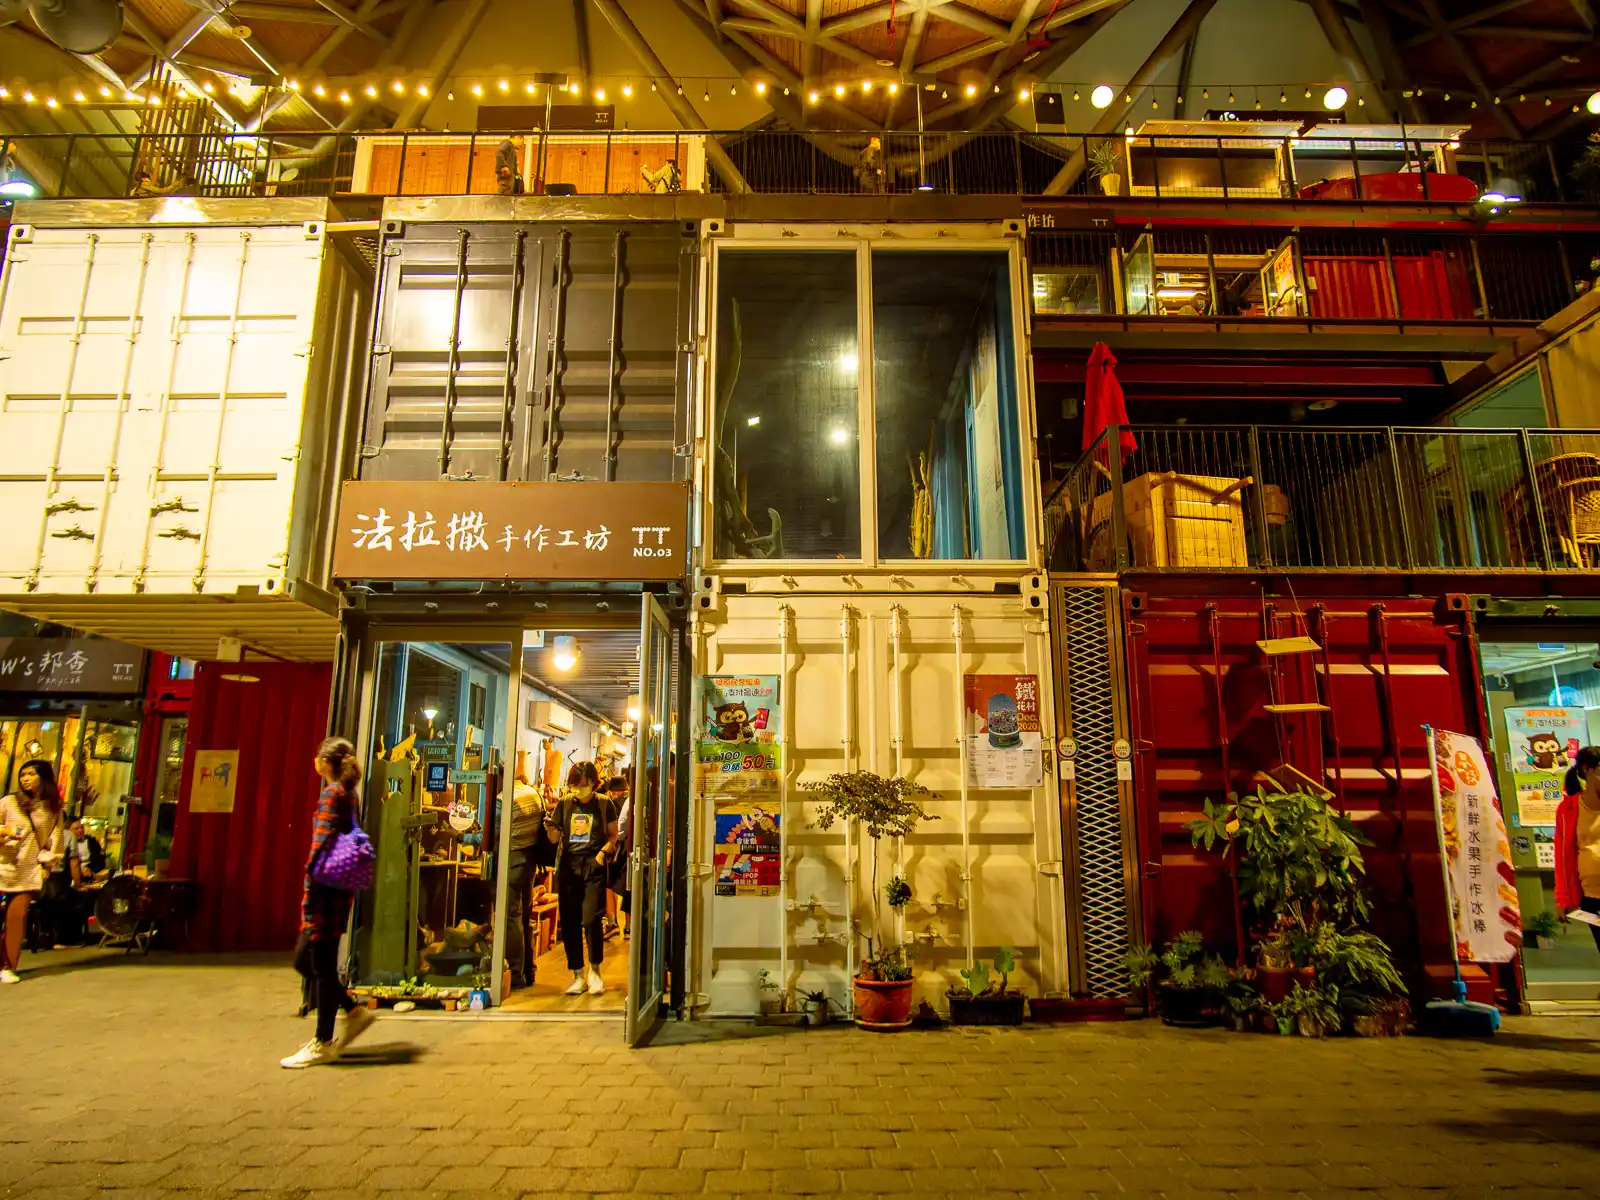 A complex of cargo containers is home to shops.